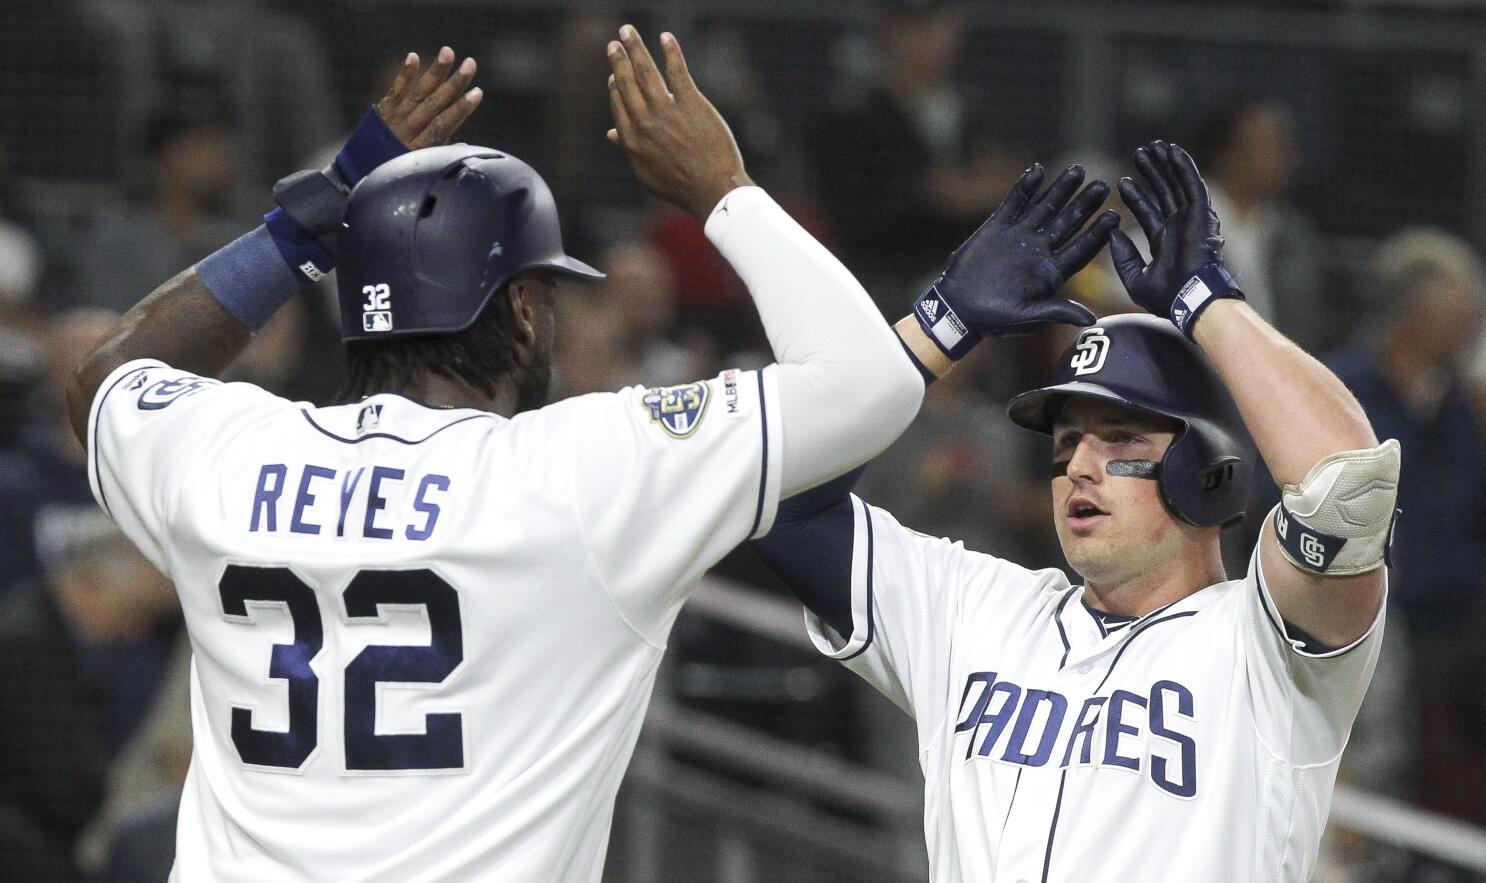 Hunter Renfroe among former Padres making himself at home with Brewers -  The San Diego Union-Tribune